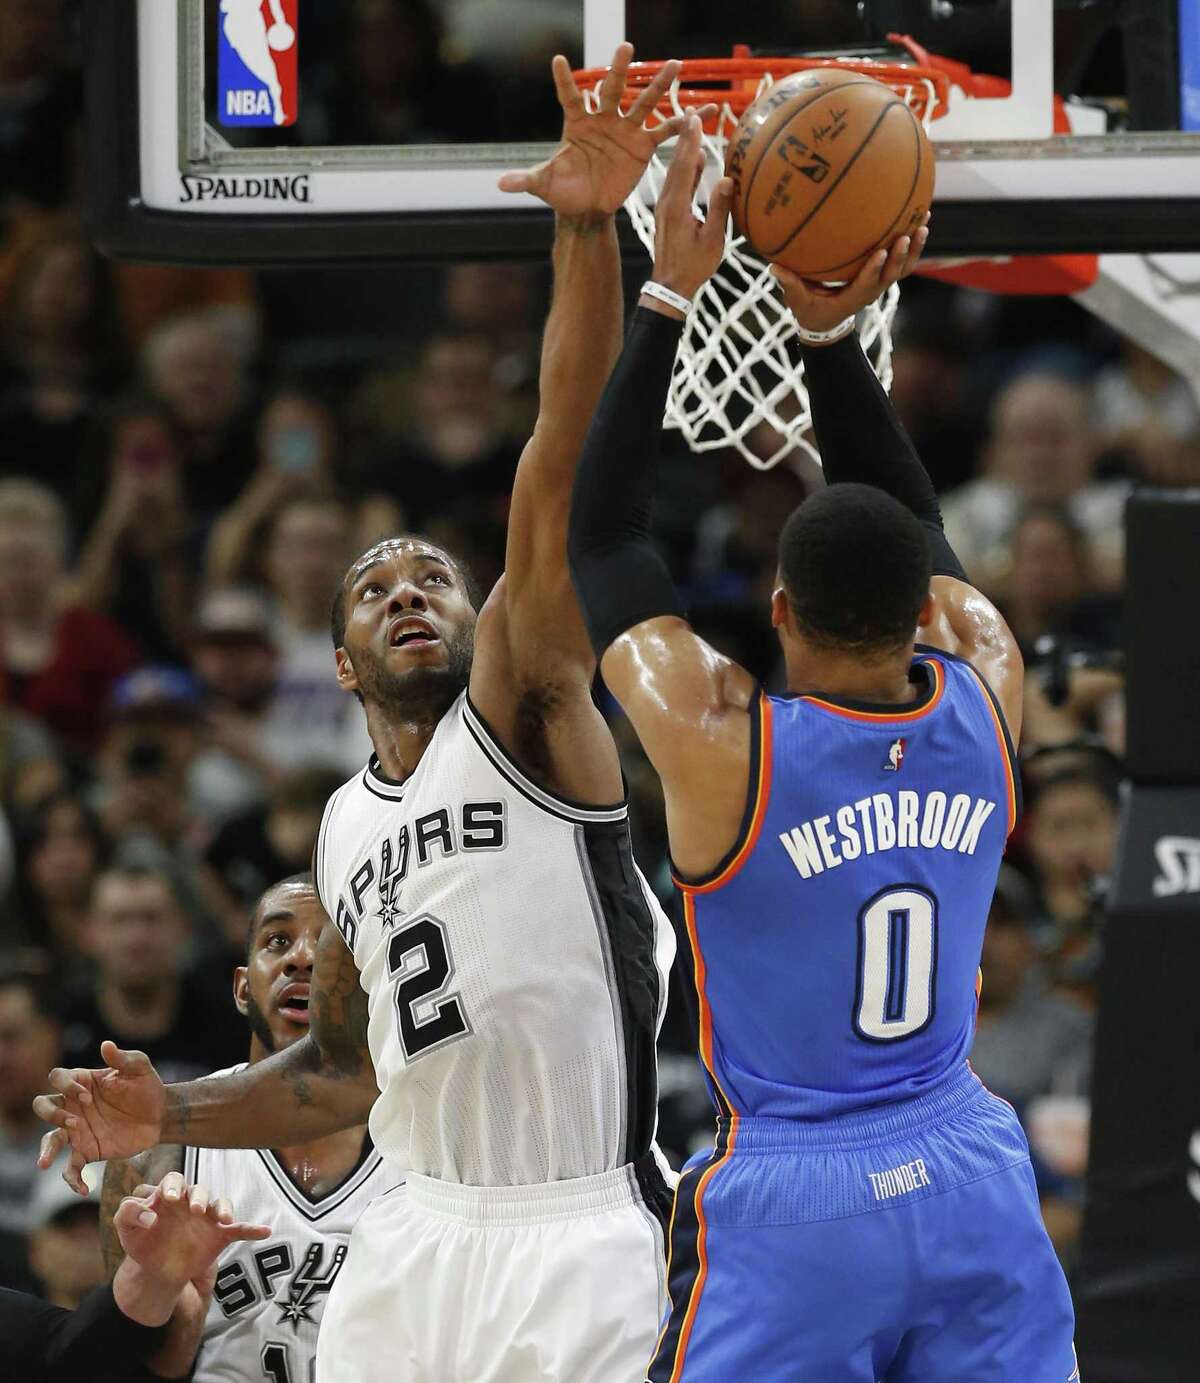 Spurs’ Kawhi Leonard (2) defends against the Oklahoma City Thunder’s Russell Westbrook (0) at the AT&T Center on Jan. 31, 2017.